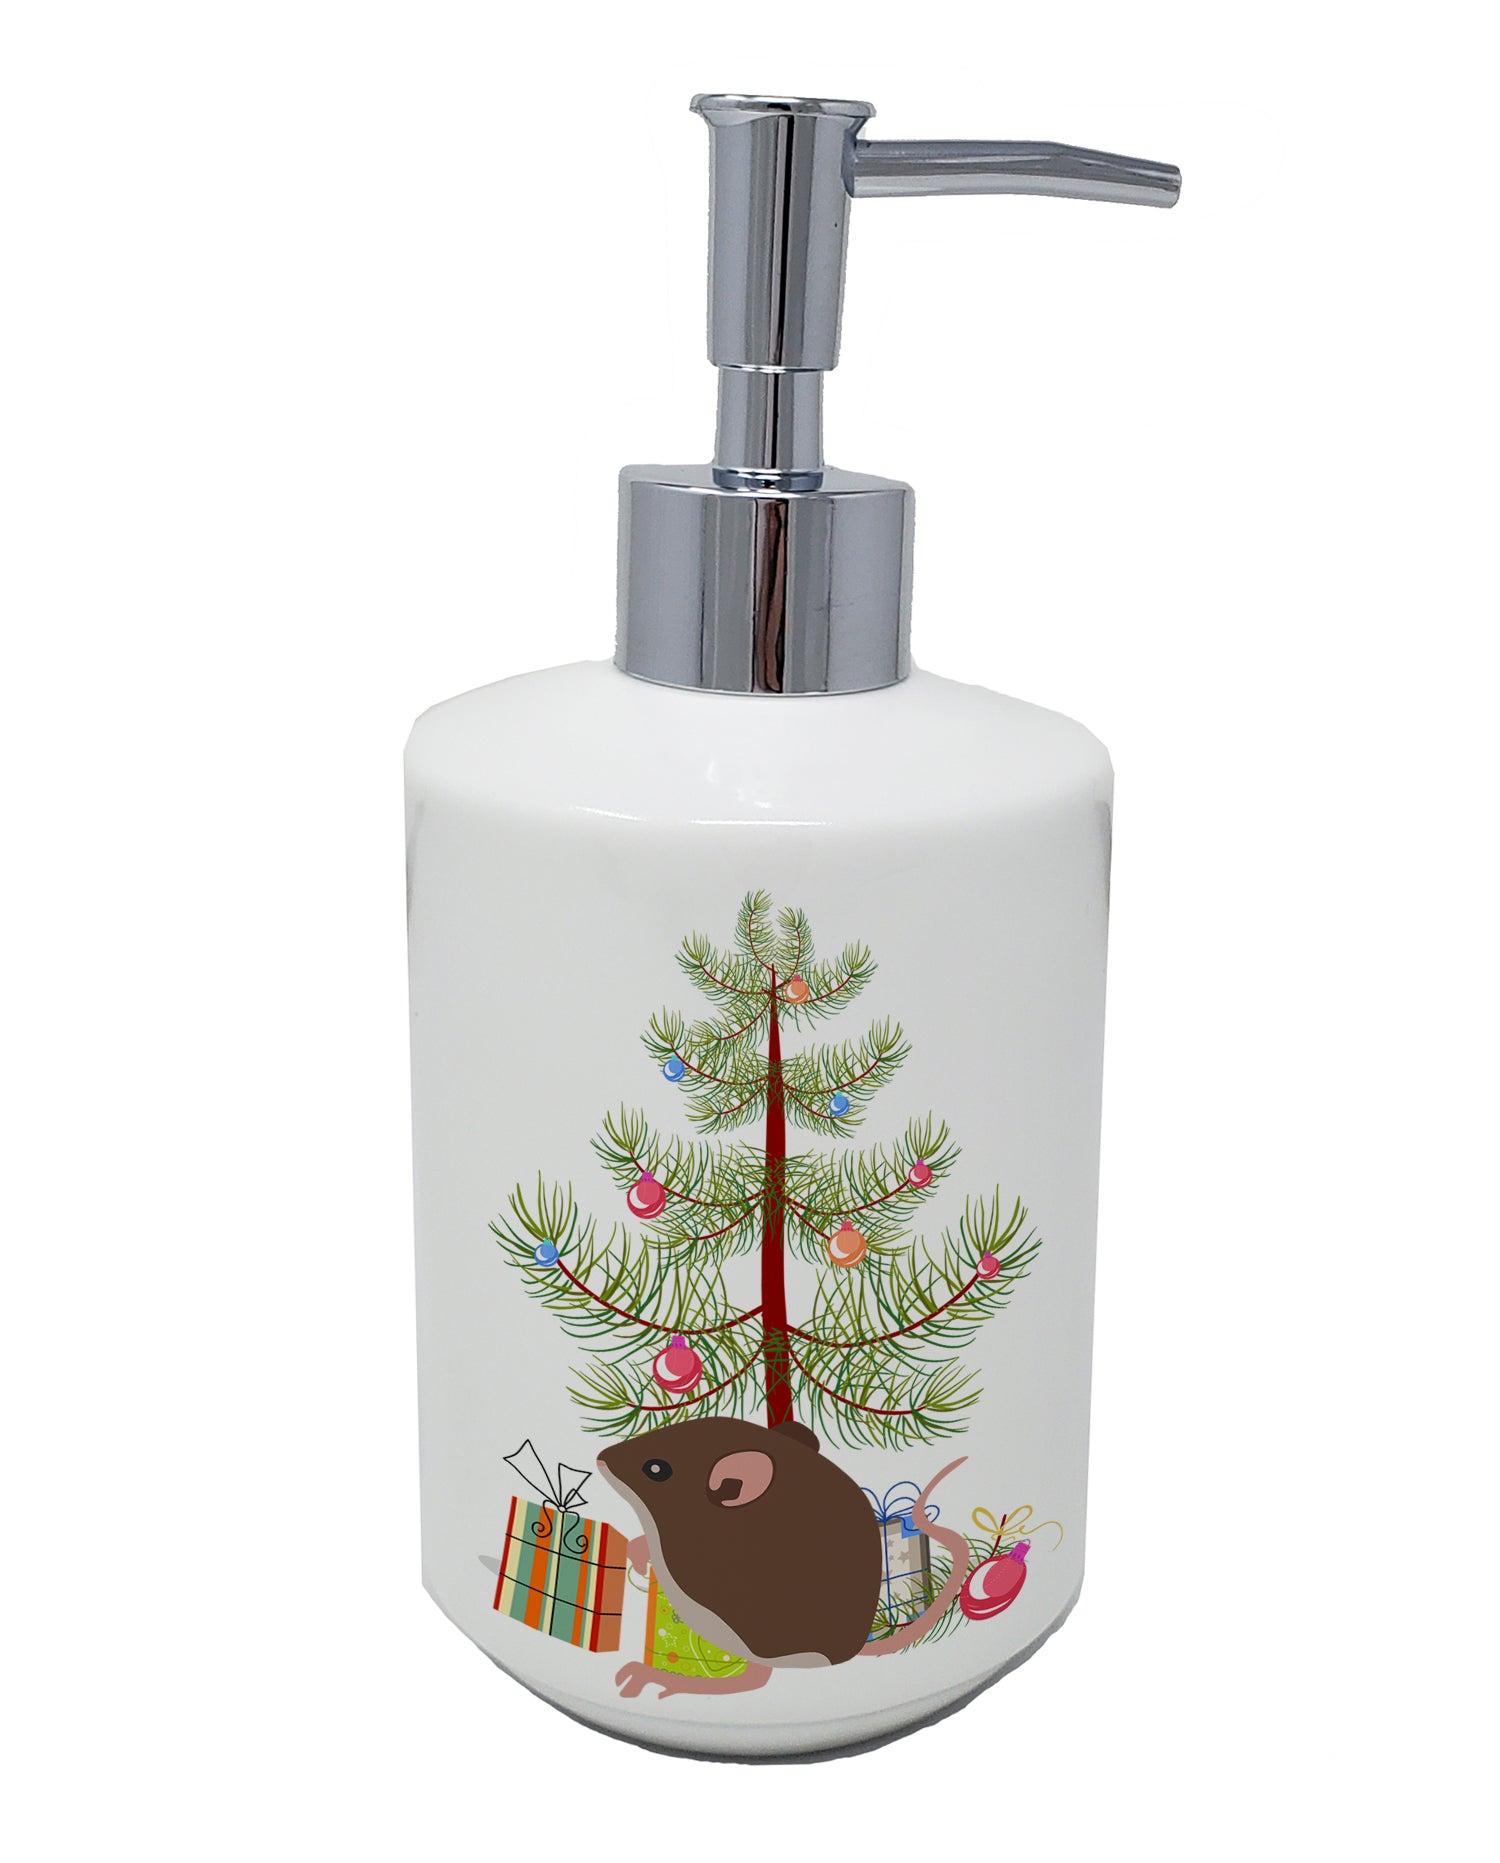 Buy this Baby Mouse Merry Christmas Ceramic Soap Dispenser